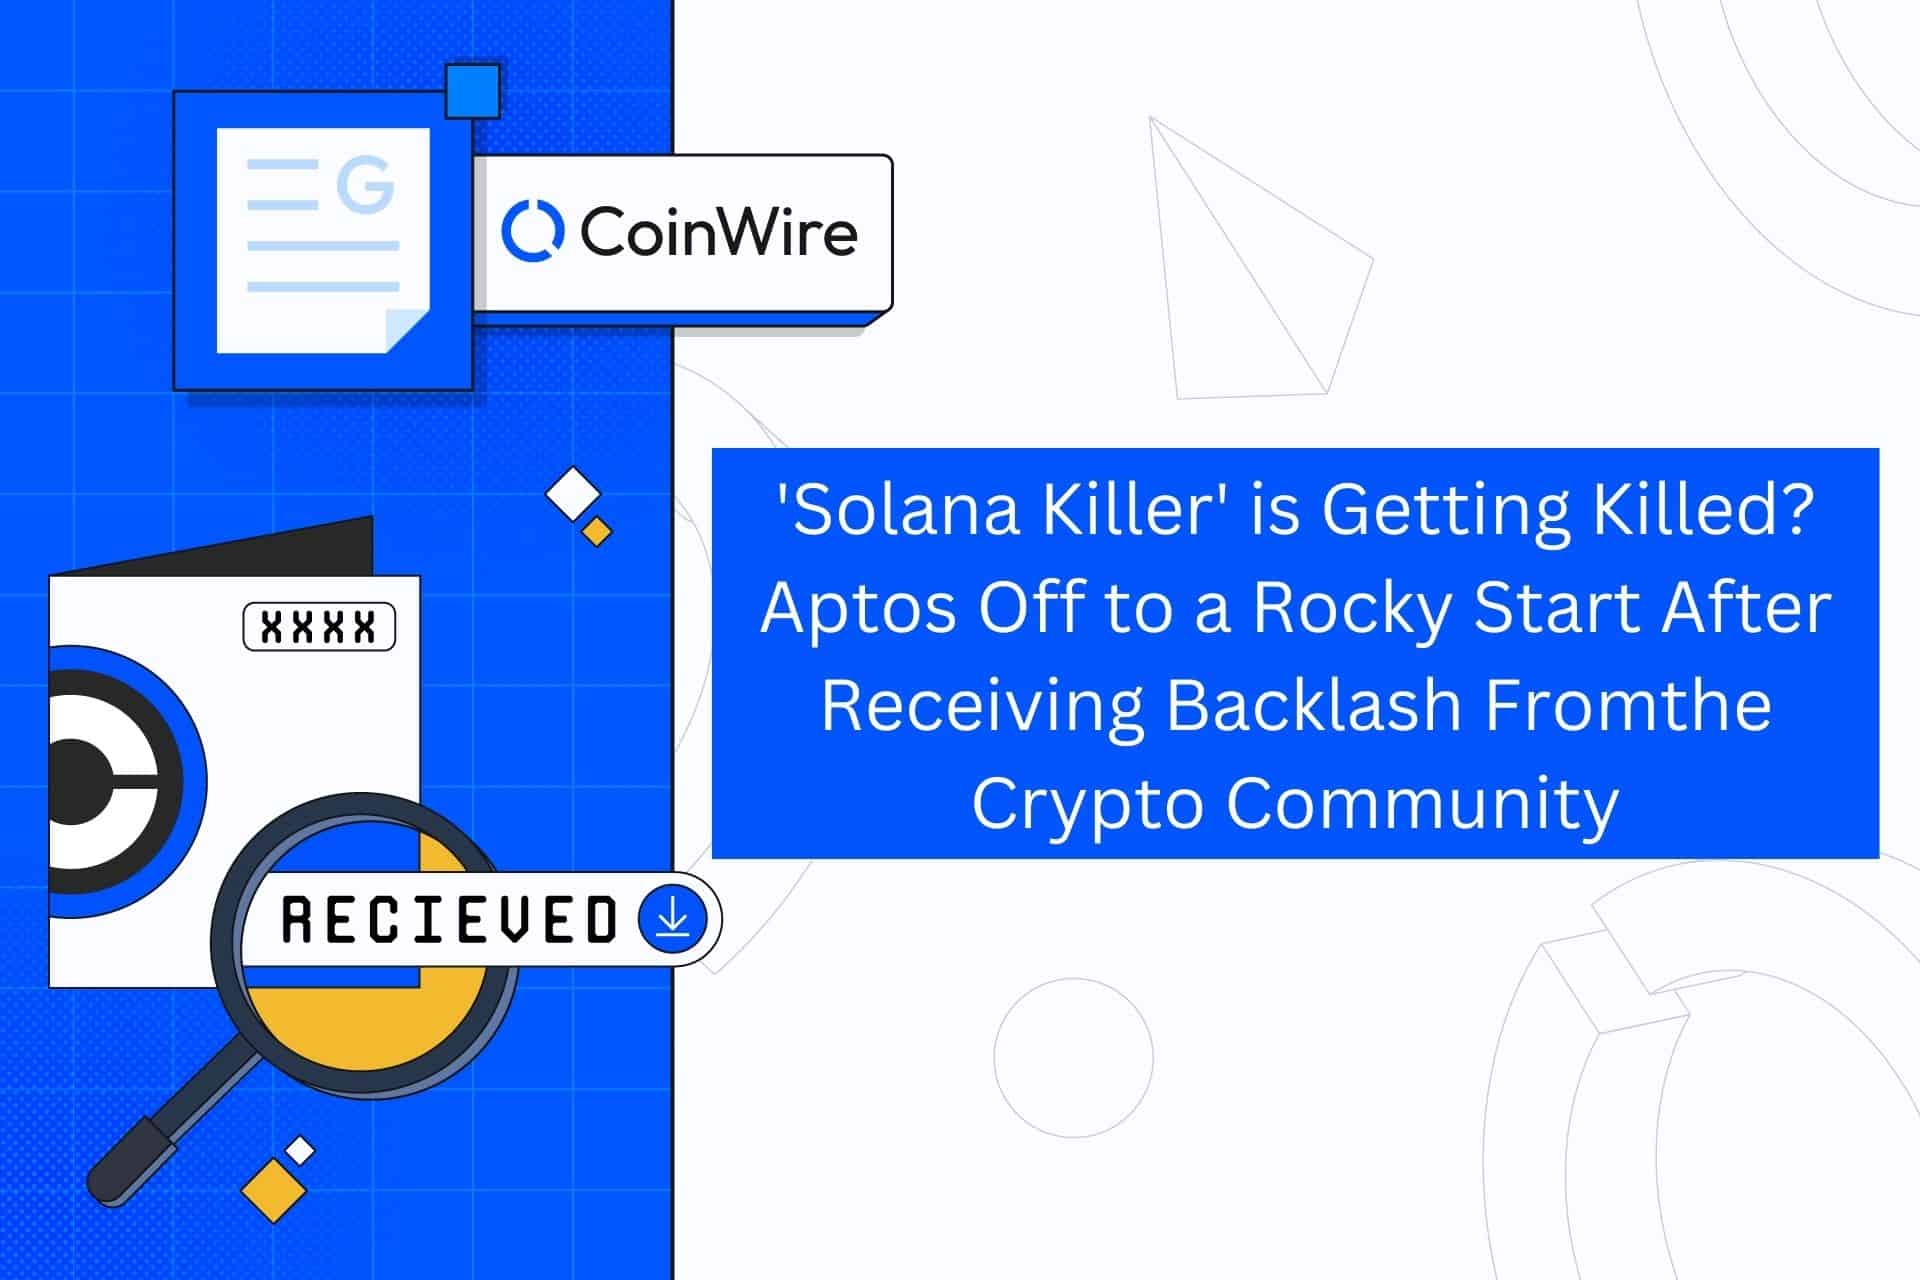 'Solana Killer' Is Getting Killed? Aptos Off To A Rocky Start After Receiving Backlash From The Crypto Community